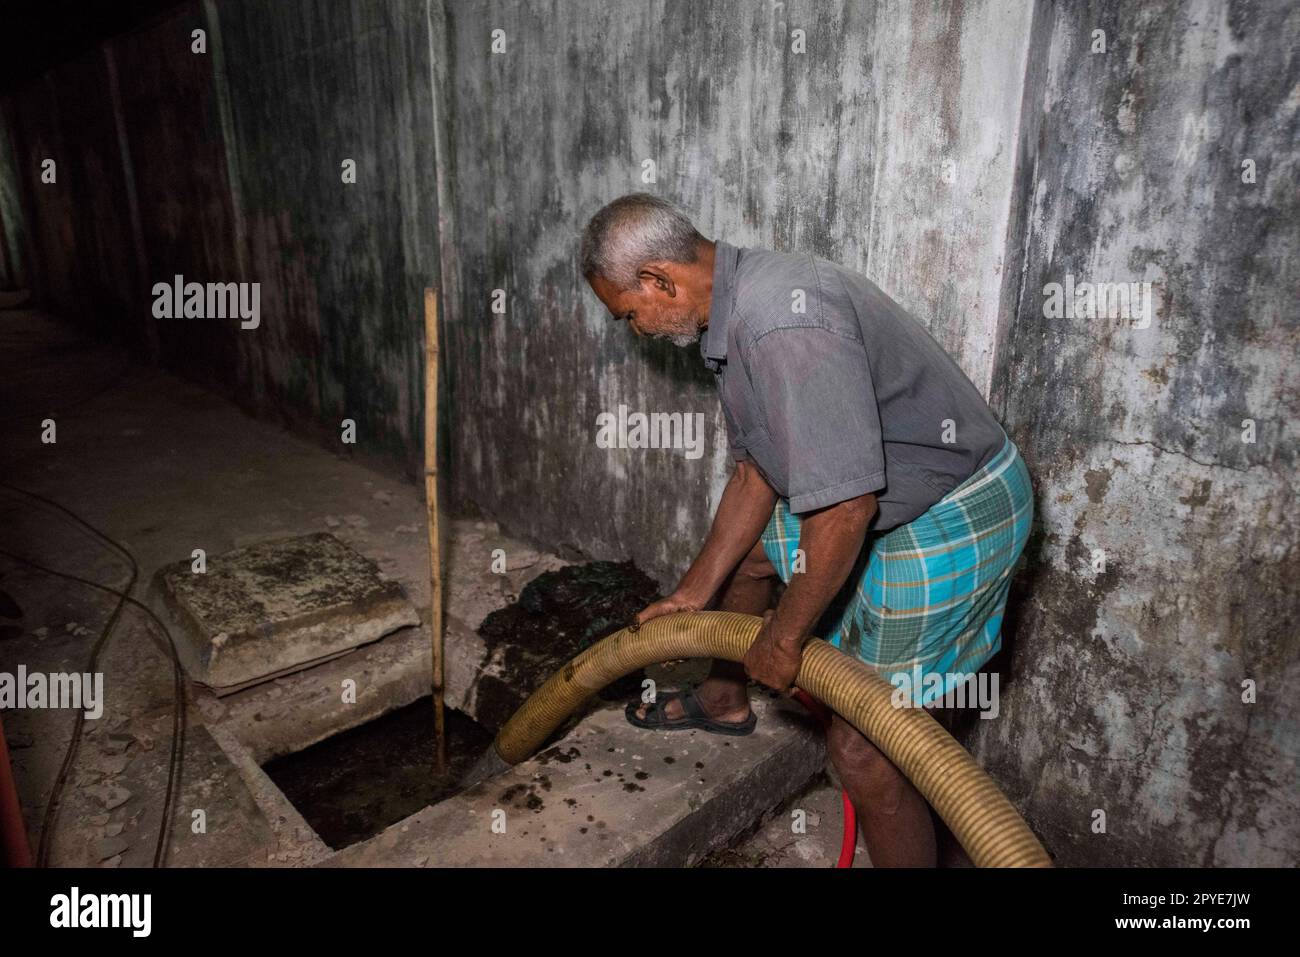 Bangladesh, Khulna. A man empties fecal sludge from a septic tank late at night at a Mosque. March 19, 2017. Editorial use only. Stock Photo